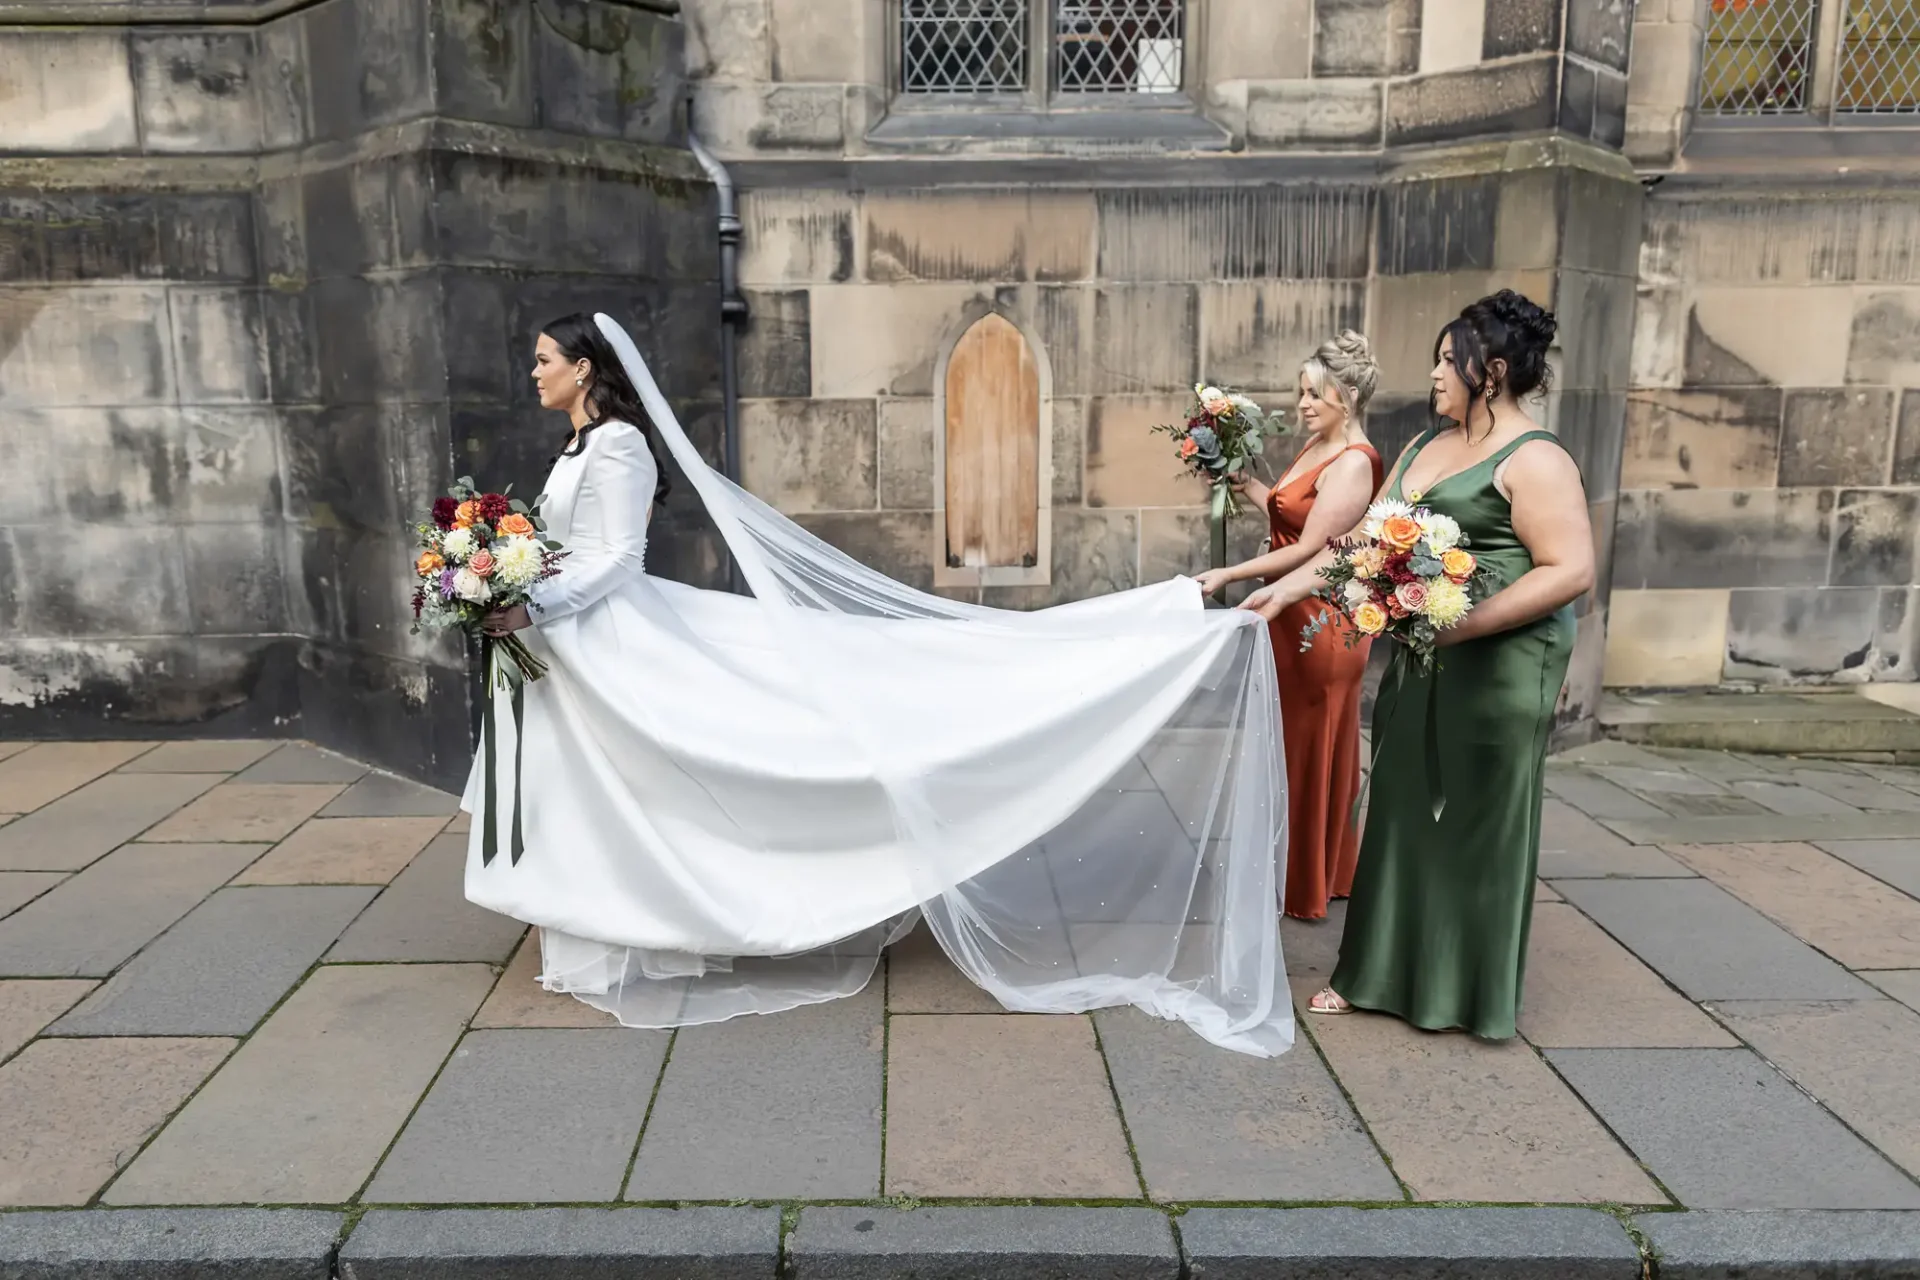 A bride in a white dress with a flowing veil, flanked by three bridesmaids in green and peach dresses, holding bouquets, outside a stone building.